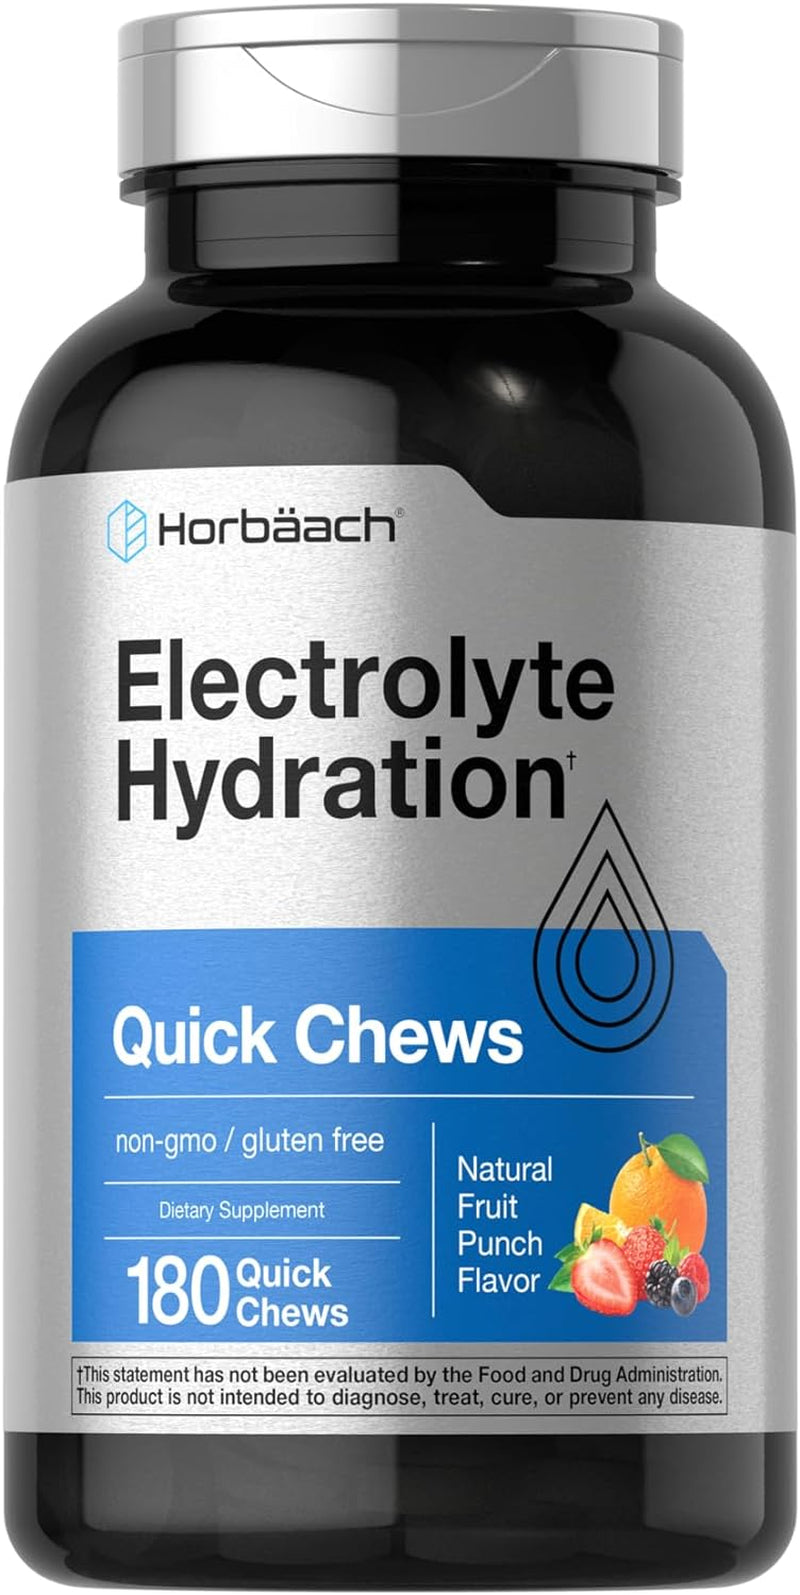 Electrolyte Quick Chews | 180 Count | Natural Fruit Punch Flavor | Vegetarian, Non-Gmo, and Gluten Free Hydration Supplement | by Horbaach